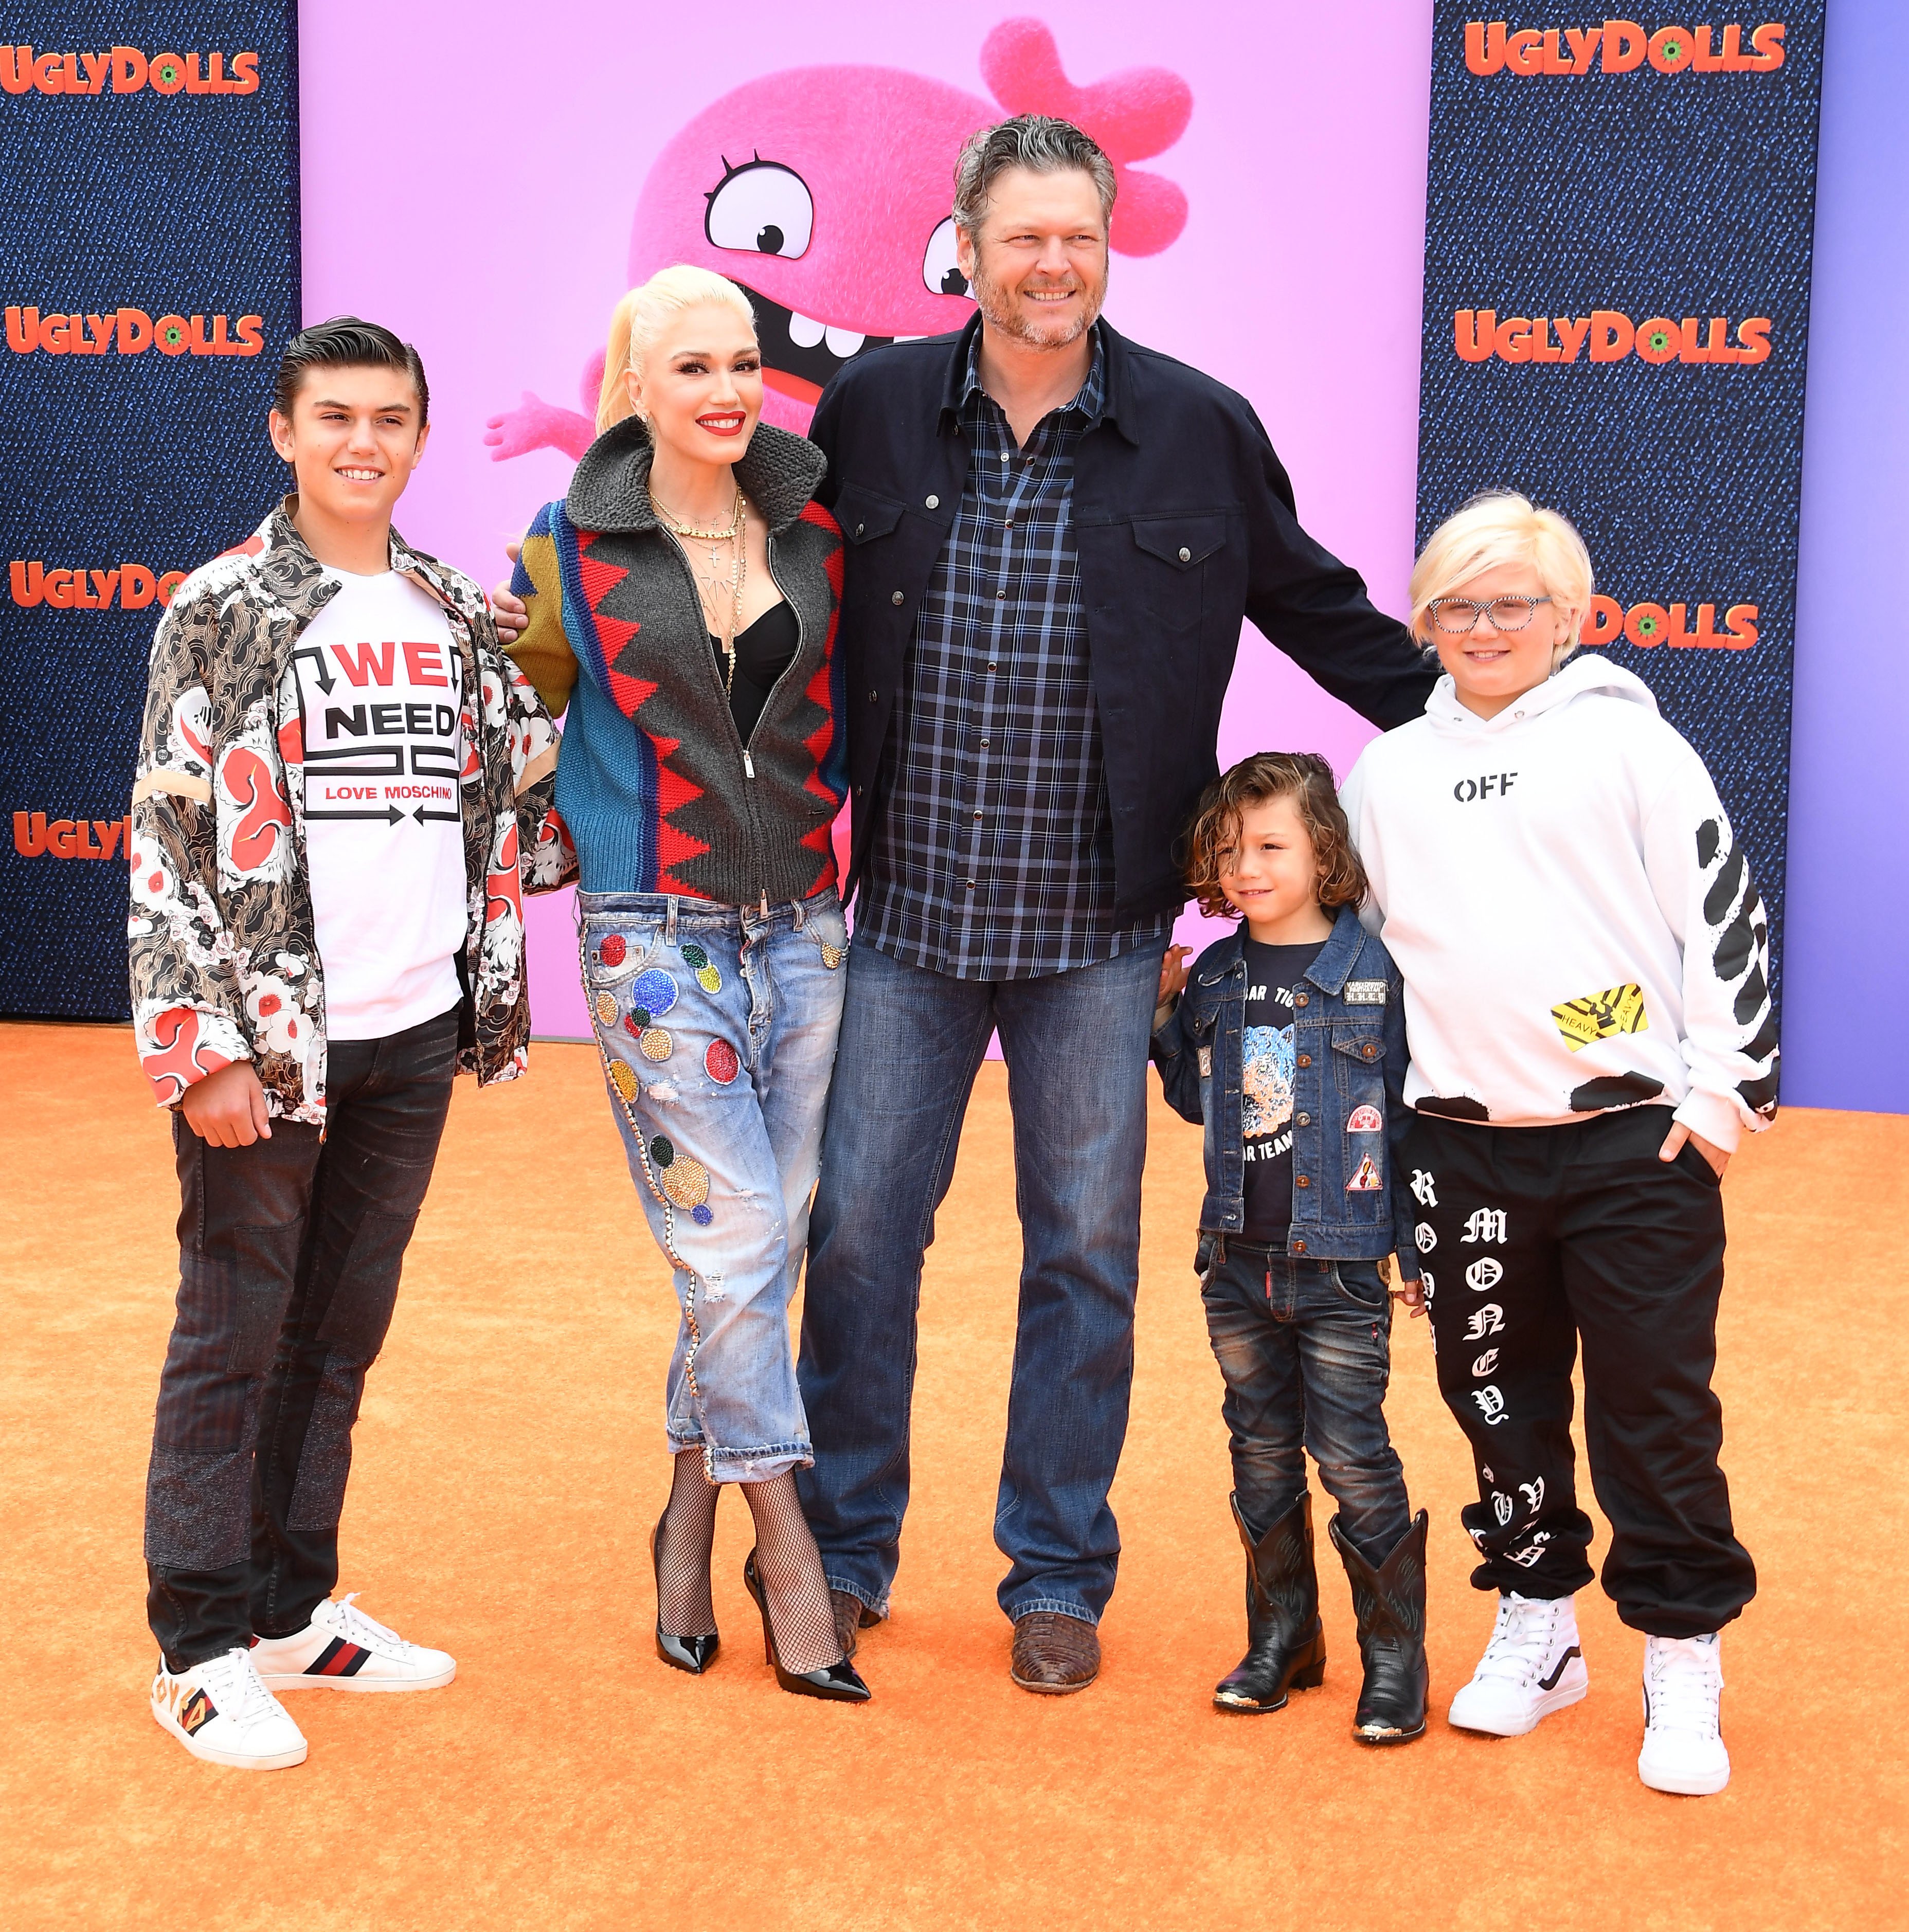 Kingston Rossdale, Gwen Stefani, Blake Shelton, Apollo Bowie Flynn Rossdale, and Zuma Nesta Rock Rossdale at the world premiere of "UglyDolls" on April 27, 2019, in Los Angeles, California | Source: Getty Images